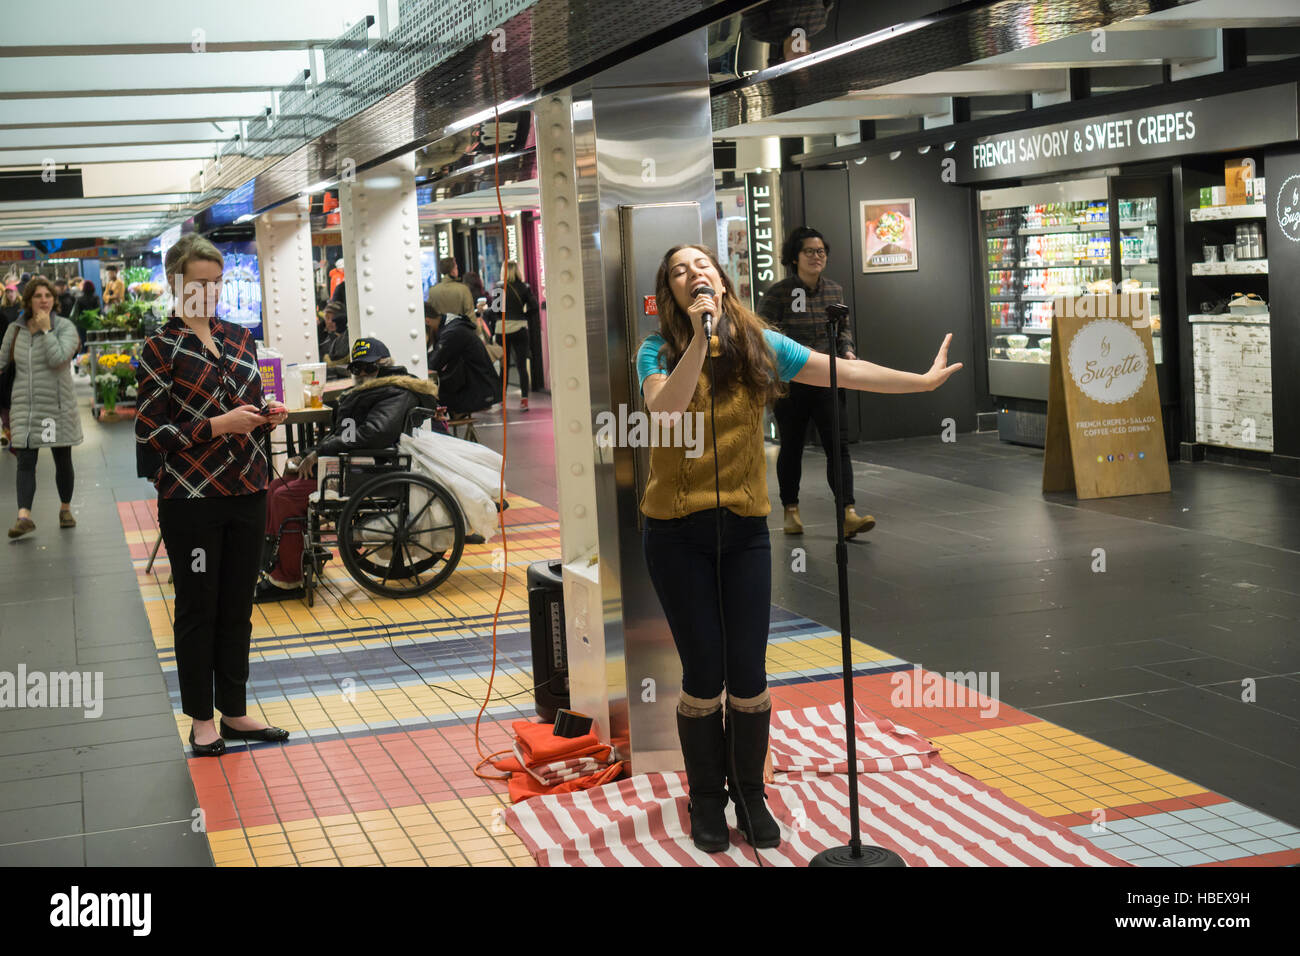 Hannah Florence, performing in Cirque du Soleil's Broadway musical 'Paramour', sings songs from the musical at a lunchtime performance in Turnstyle, a shopping and foodie arcade in the subway in New York Tuesday, November, 29, 2016. 'Paramour' is at the Lyric Theatre and is about the golden age of Hollywood. (© Richard B. Levine) Stock Photo